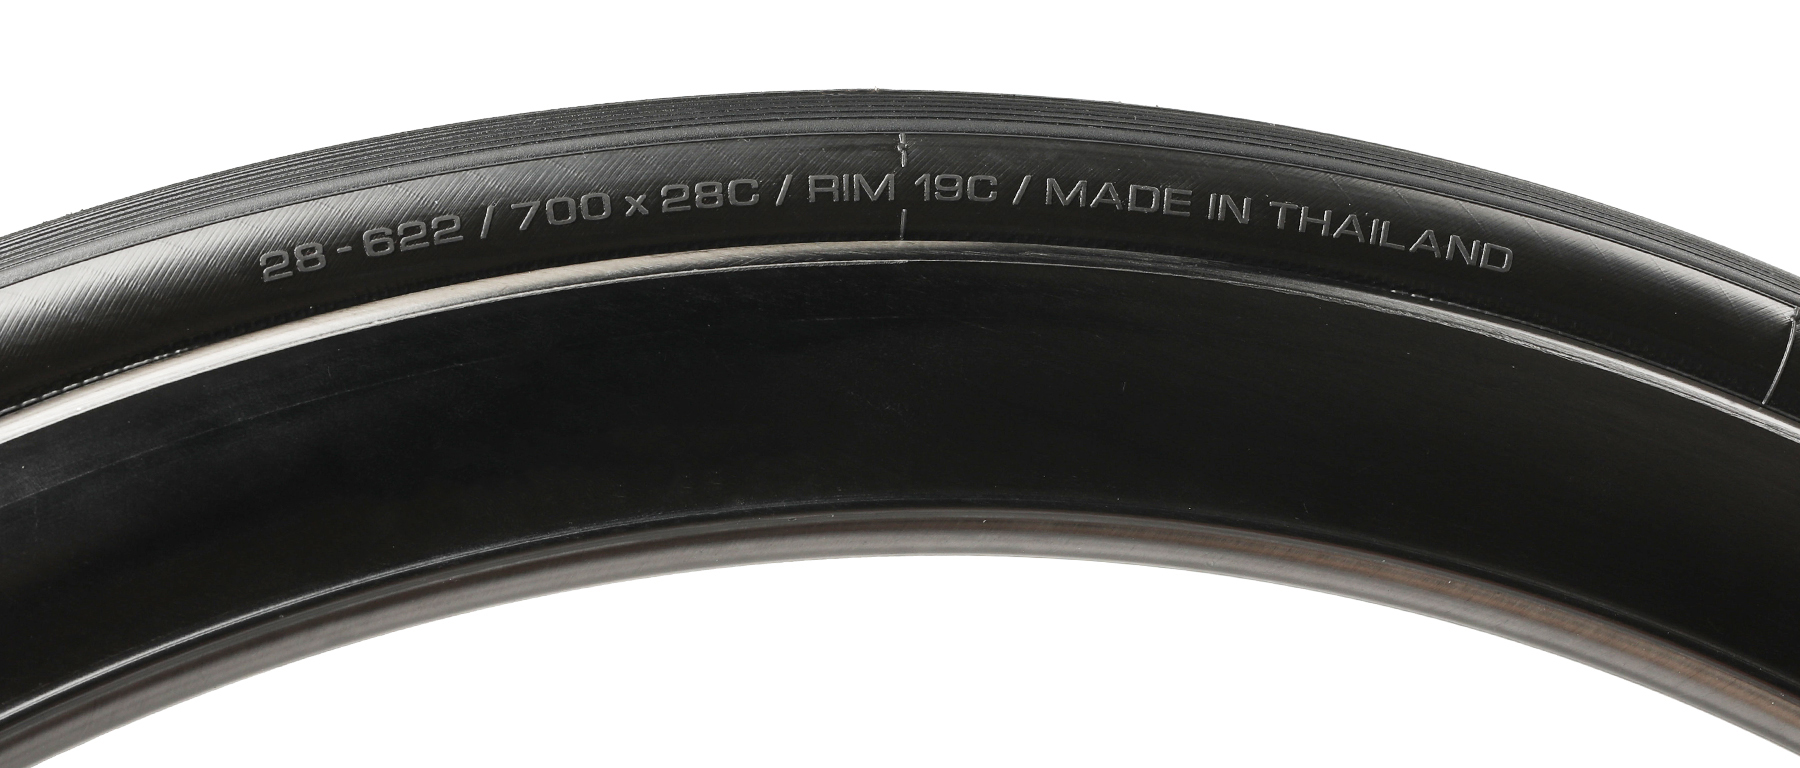 Vittoria Corsa N.EXT TLR G2.0 Tubeless Road Tire 2-Pack